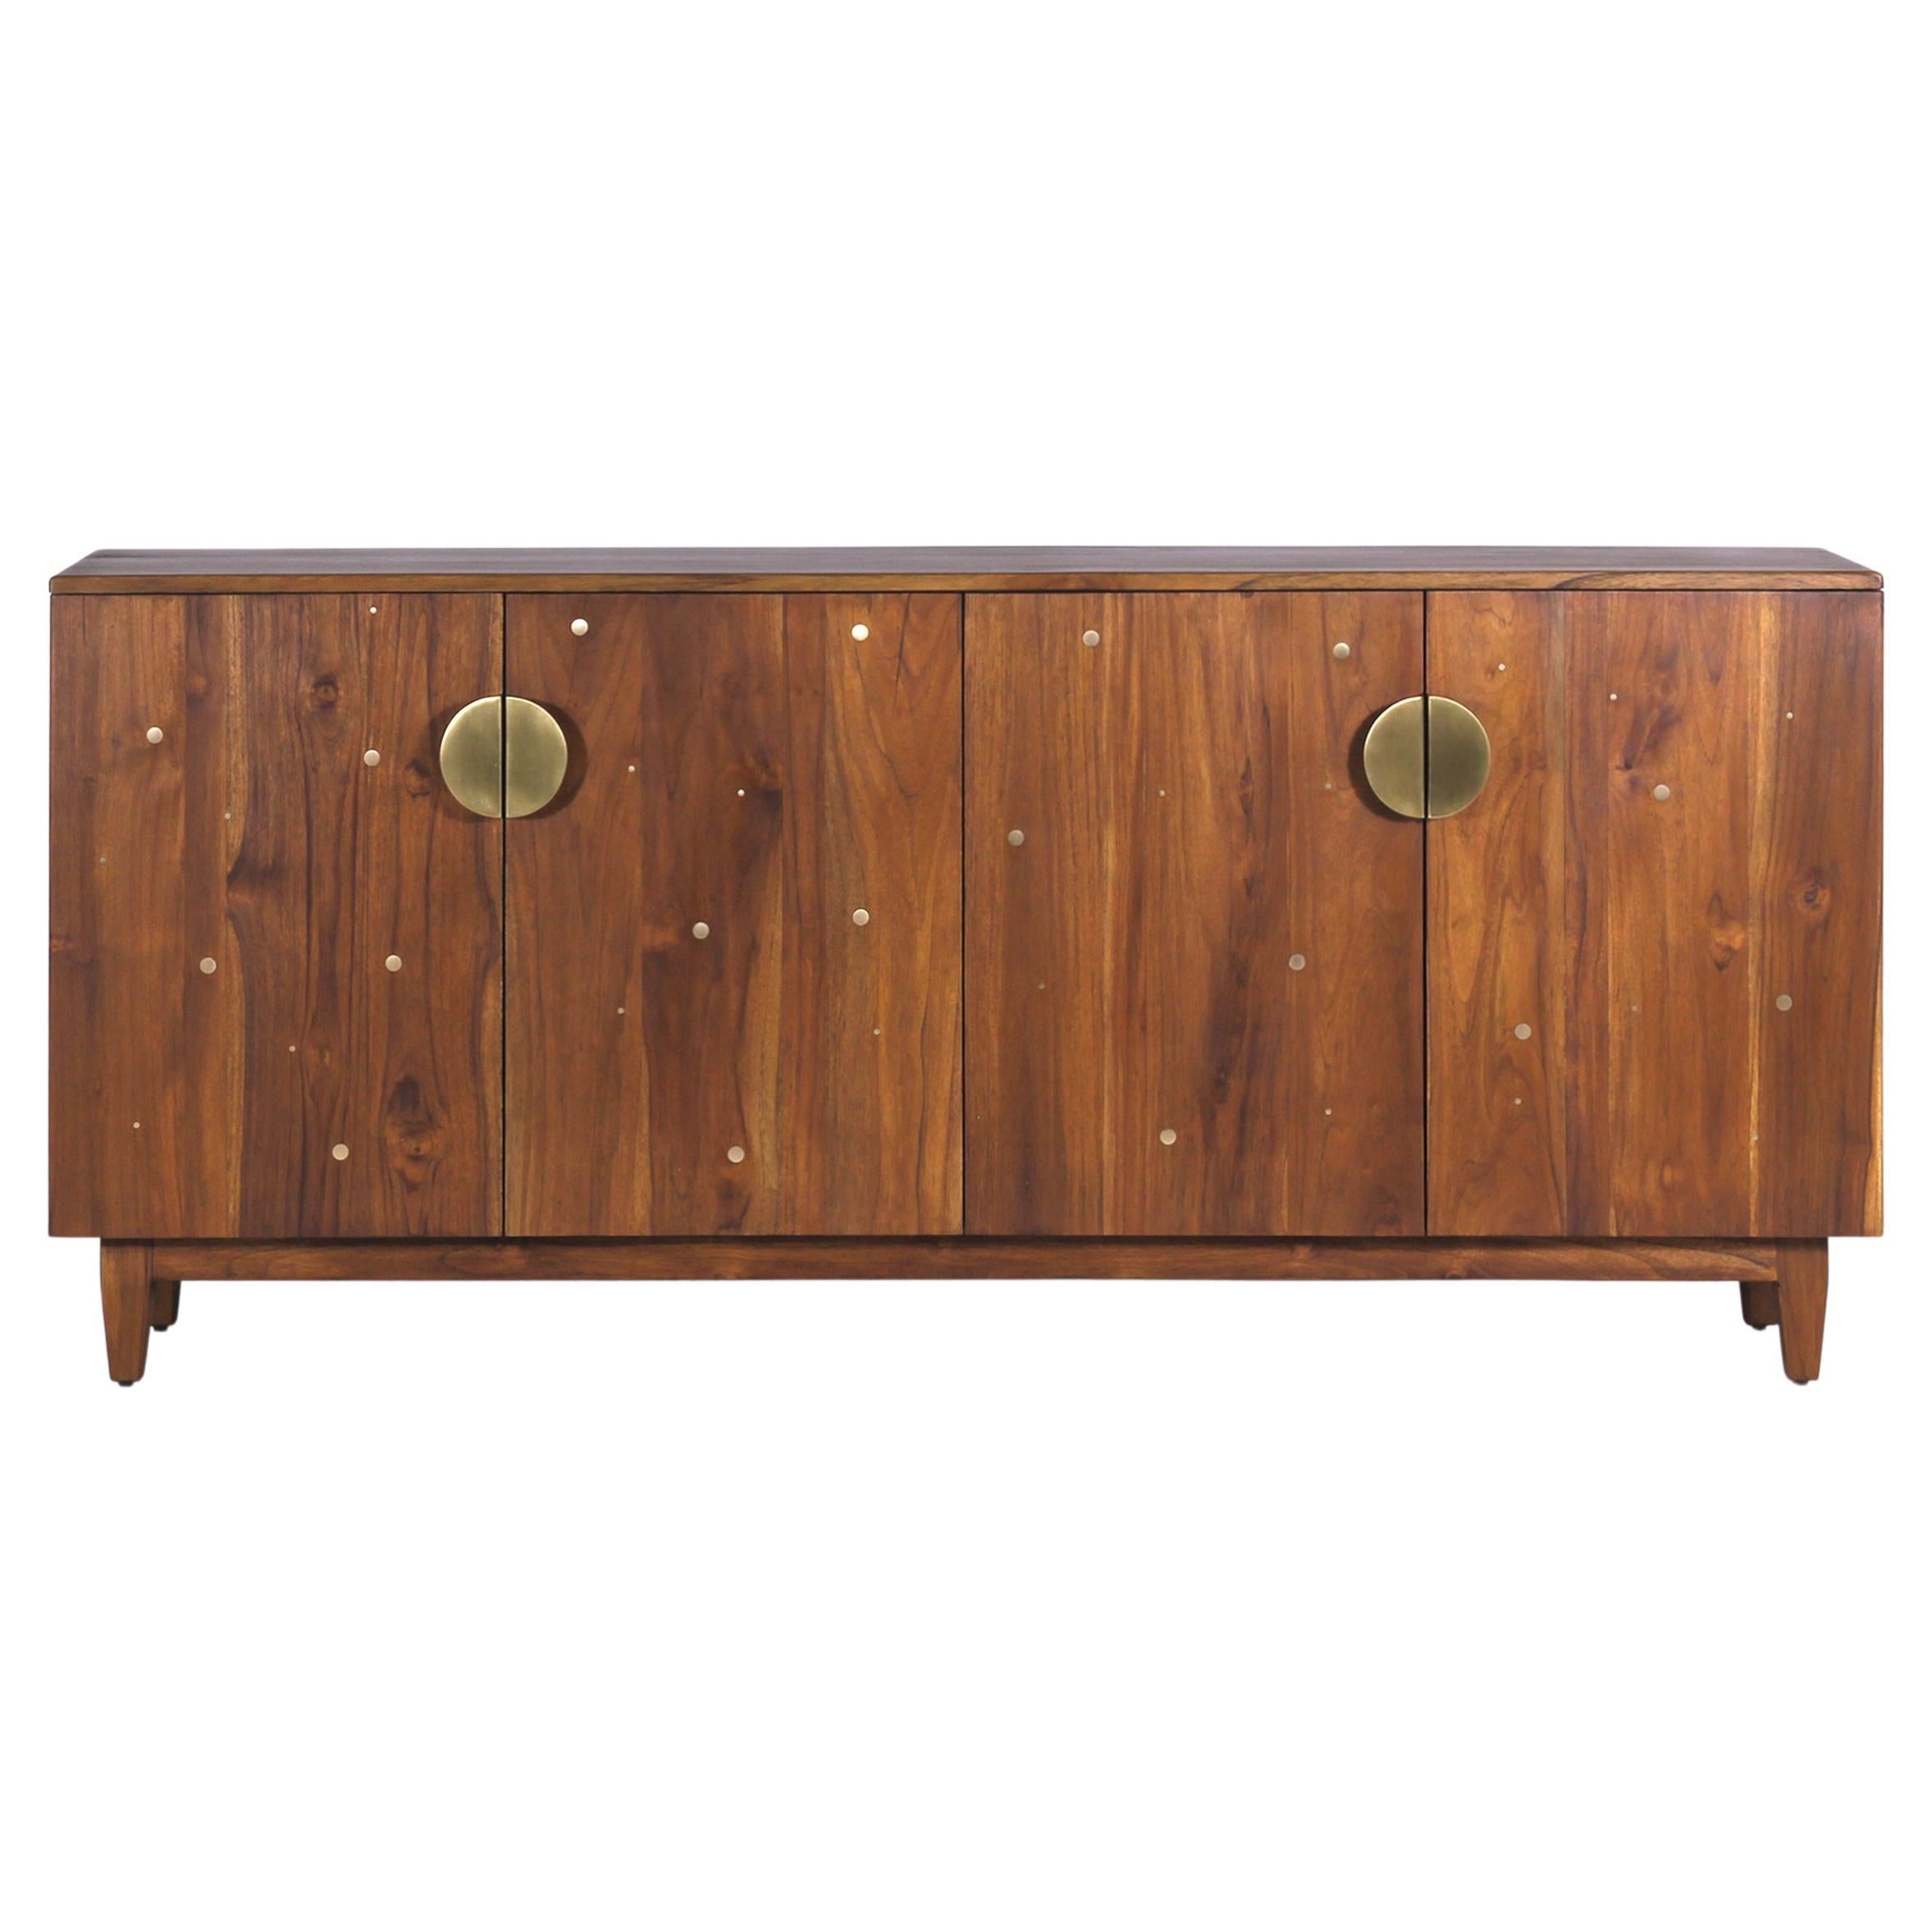 Contemporary Solid Oak Night Sky Credenza/Cabinet Handcrafted with Brass Inlay